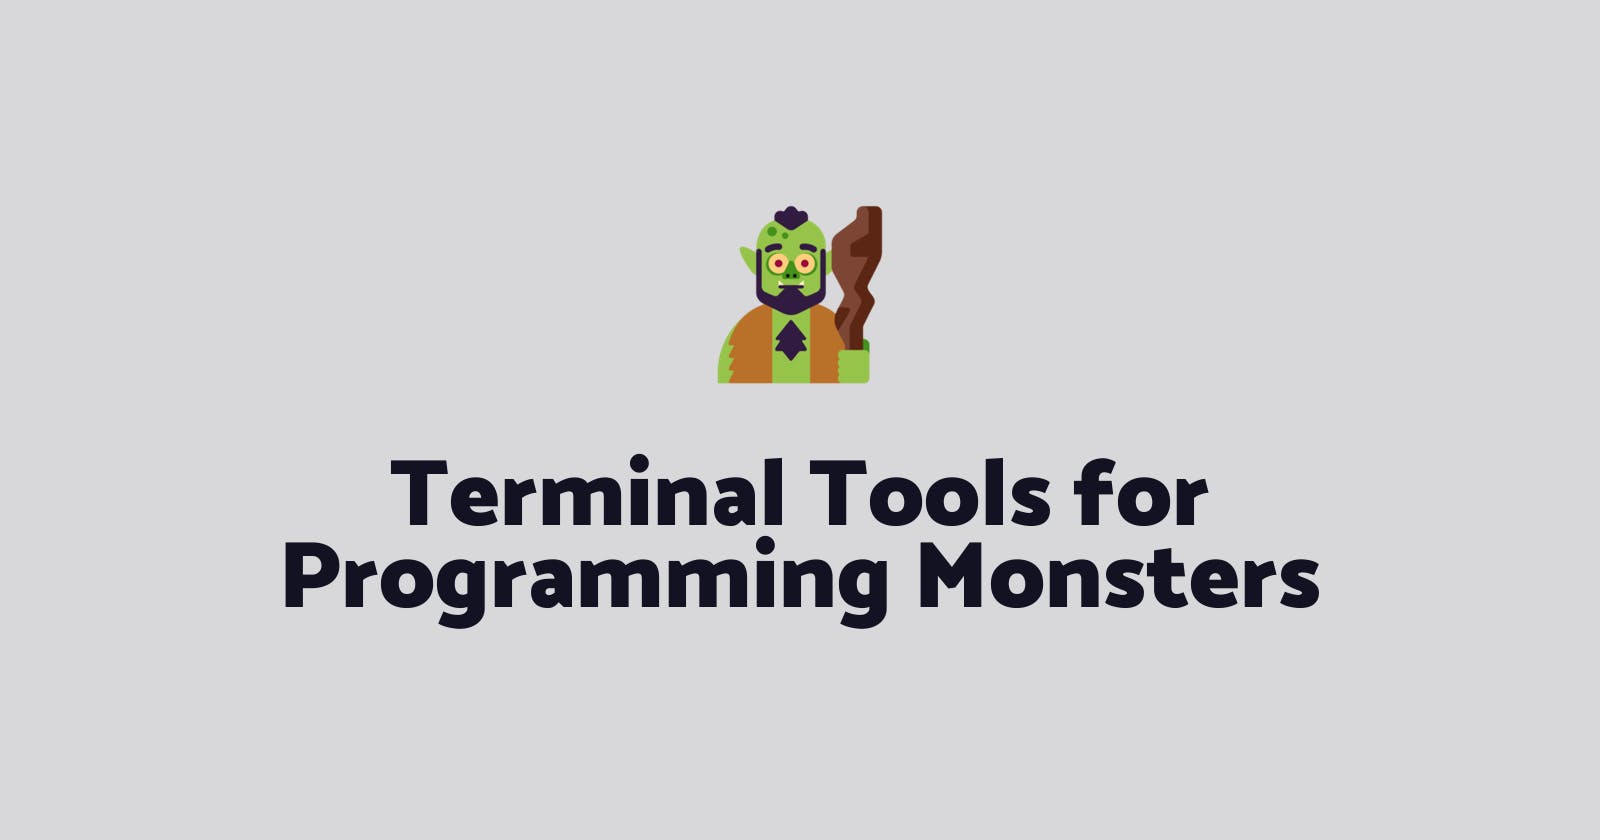 Terminal tools for programming monsters